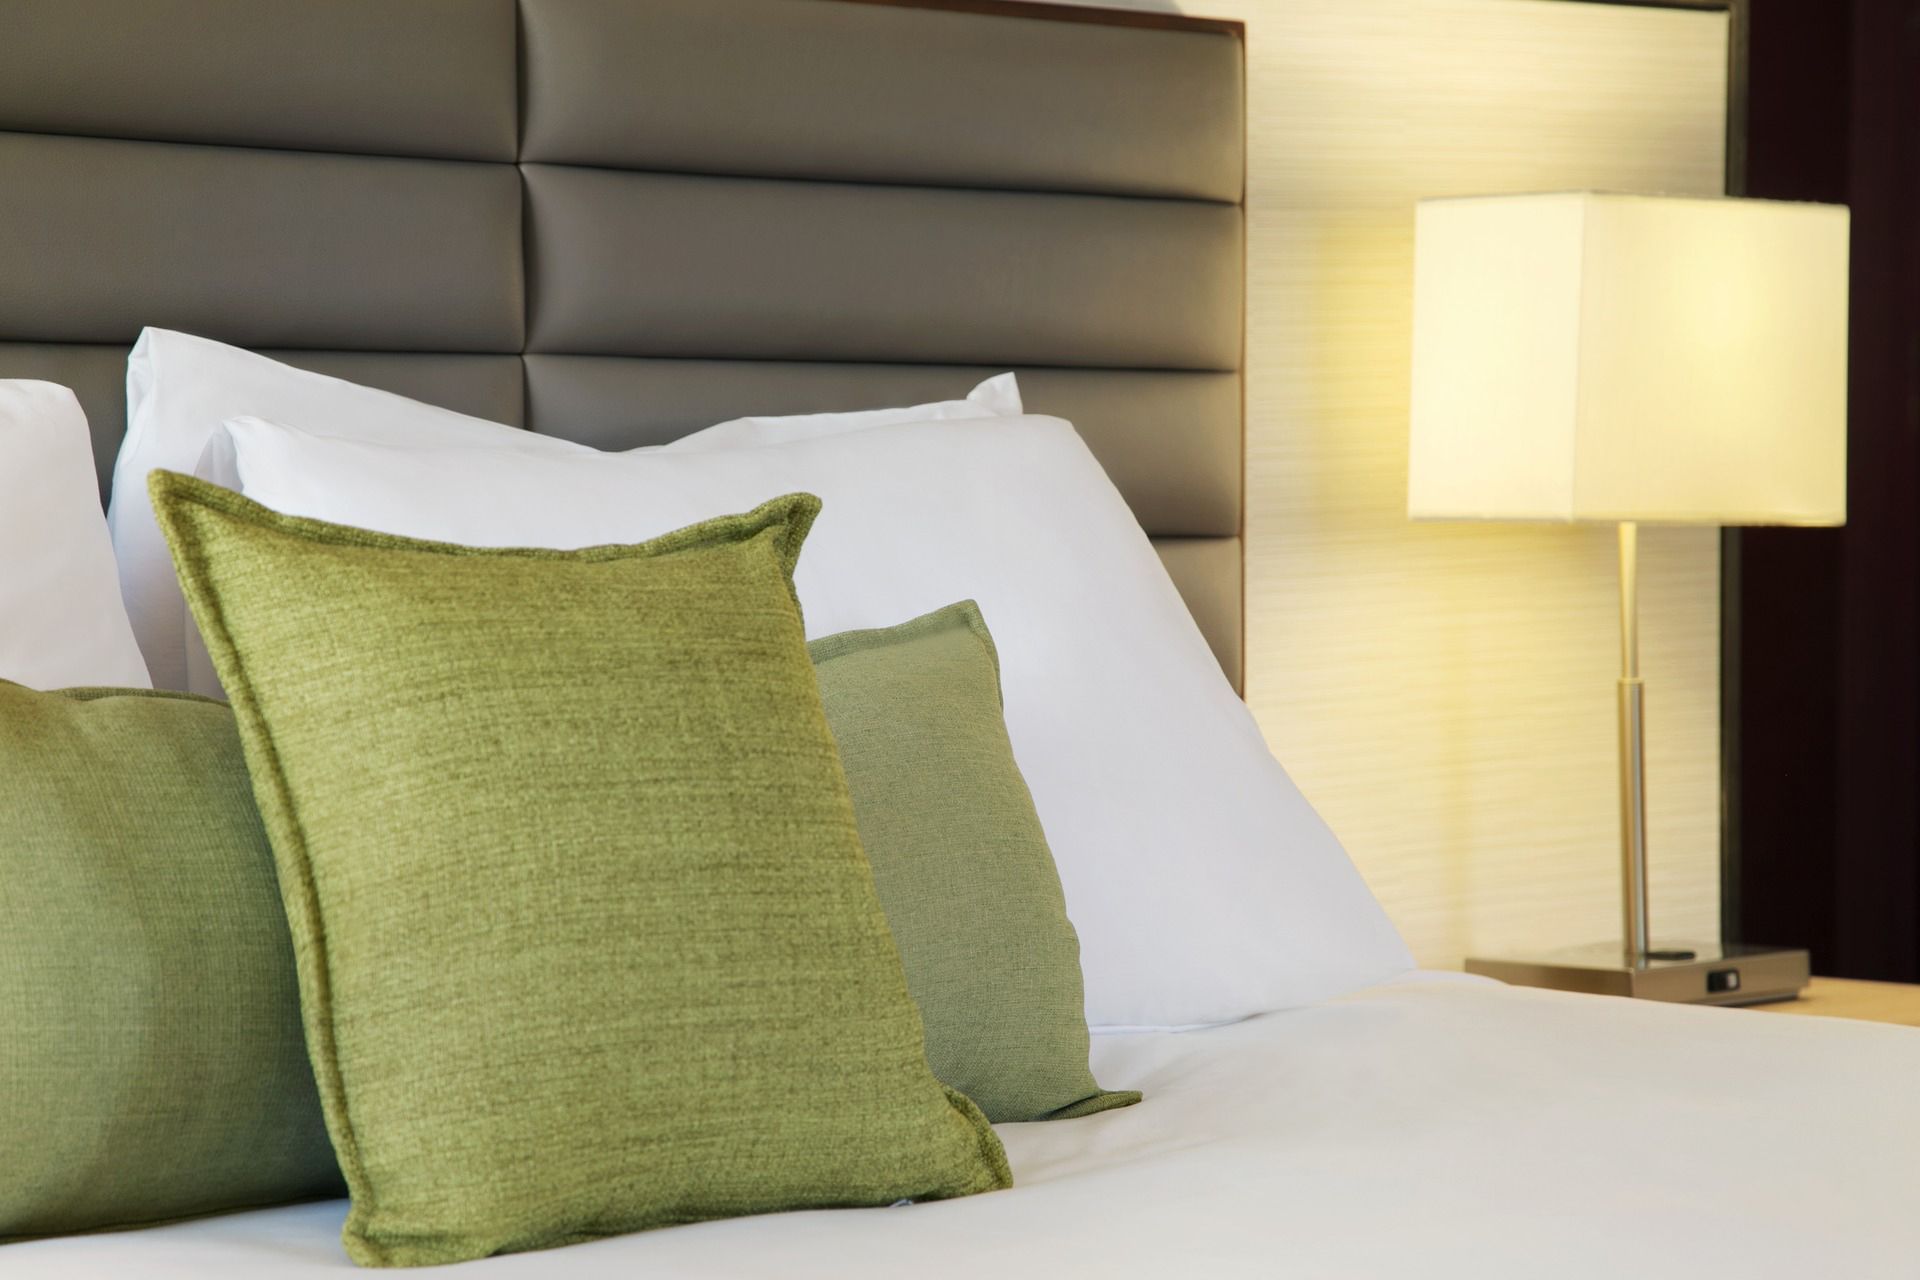 Green pillows on bed with white sheets next to lamp